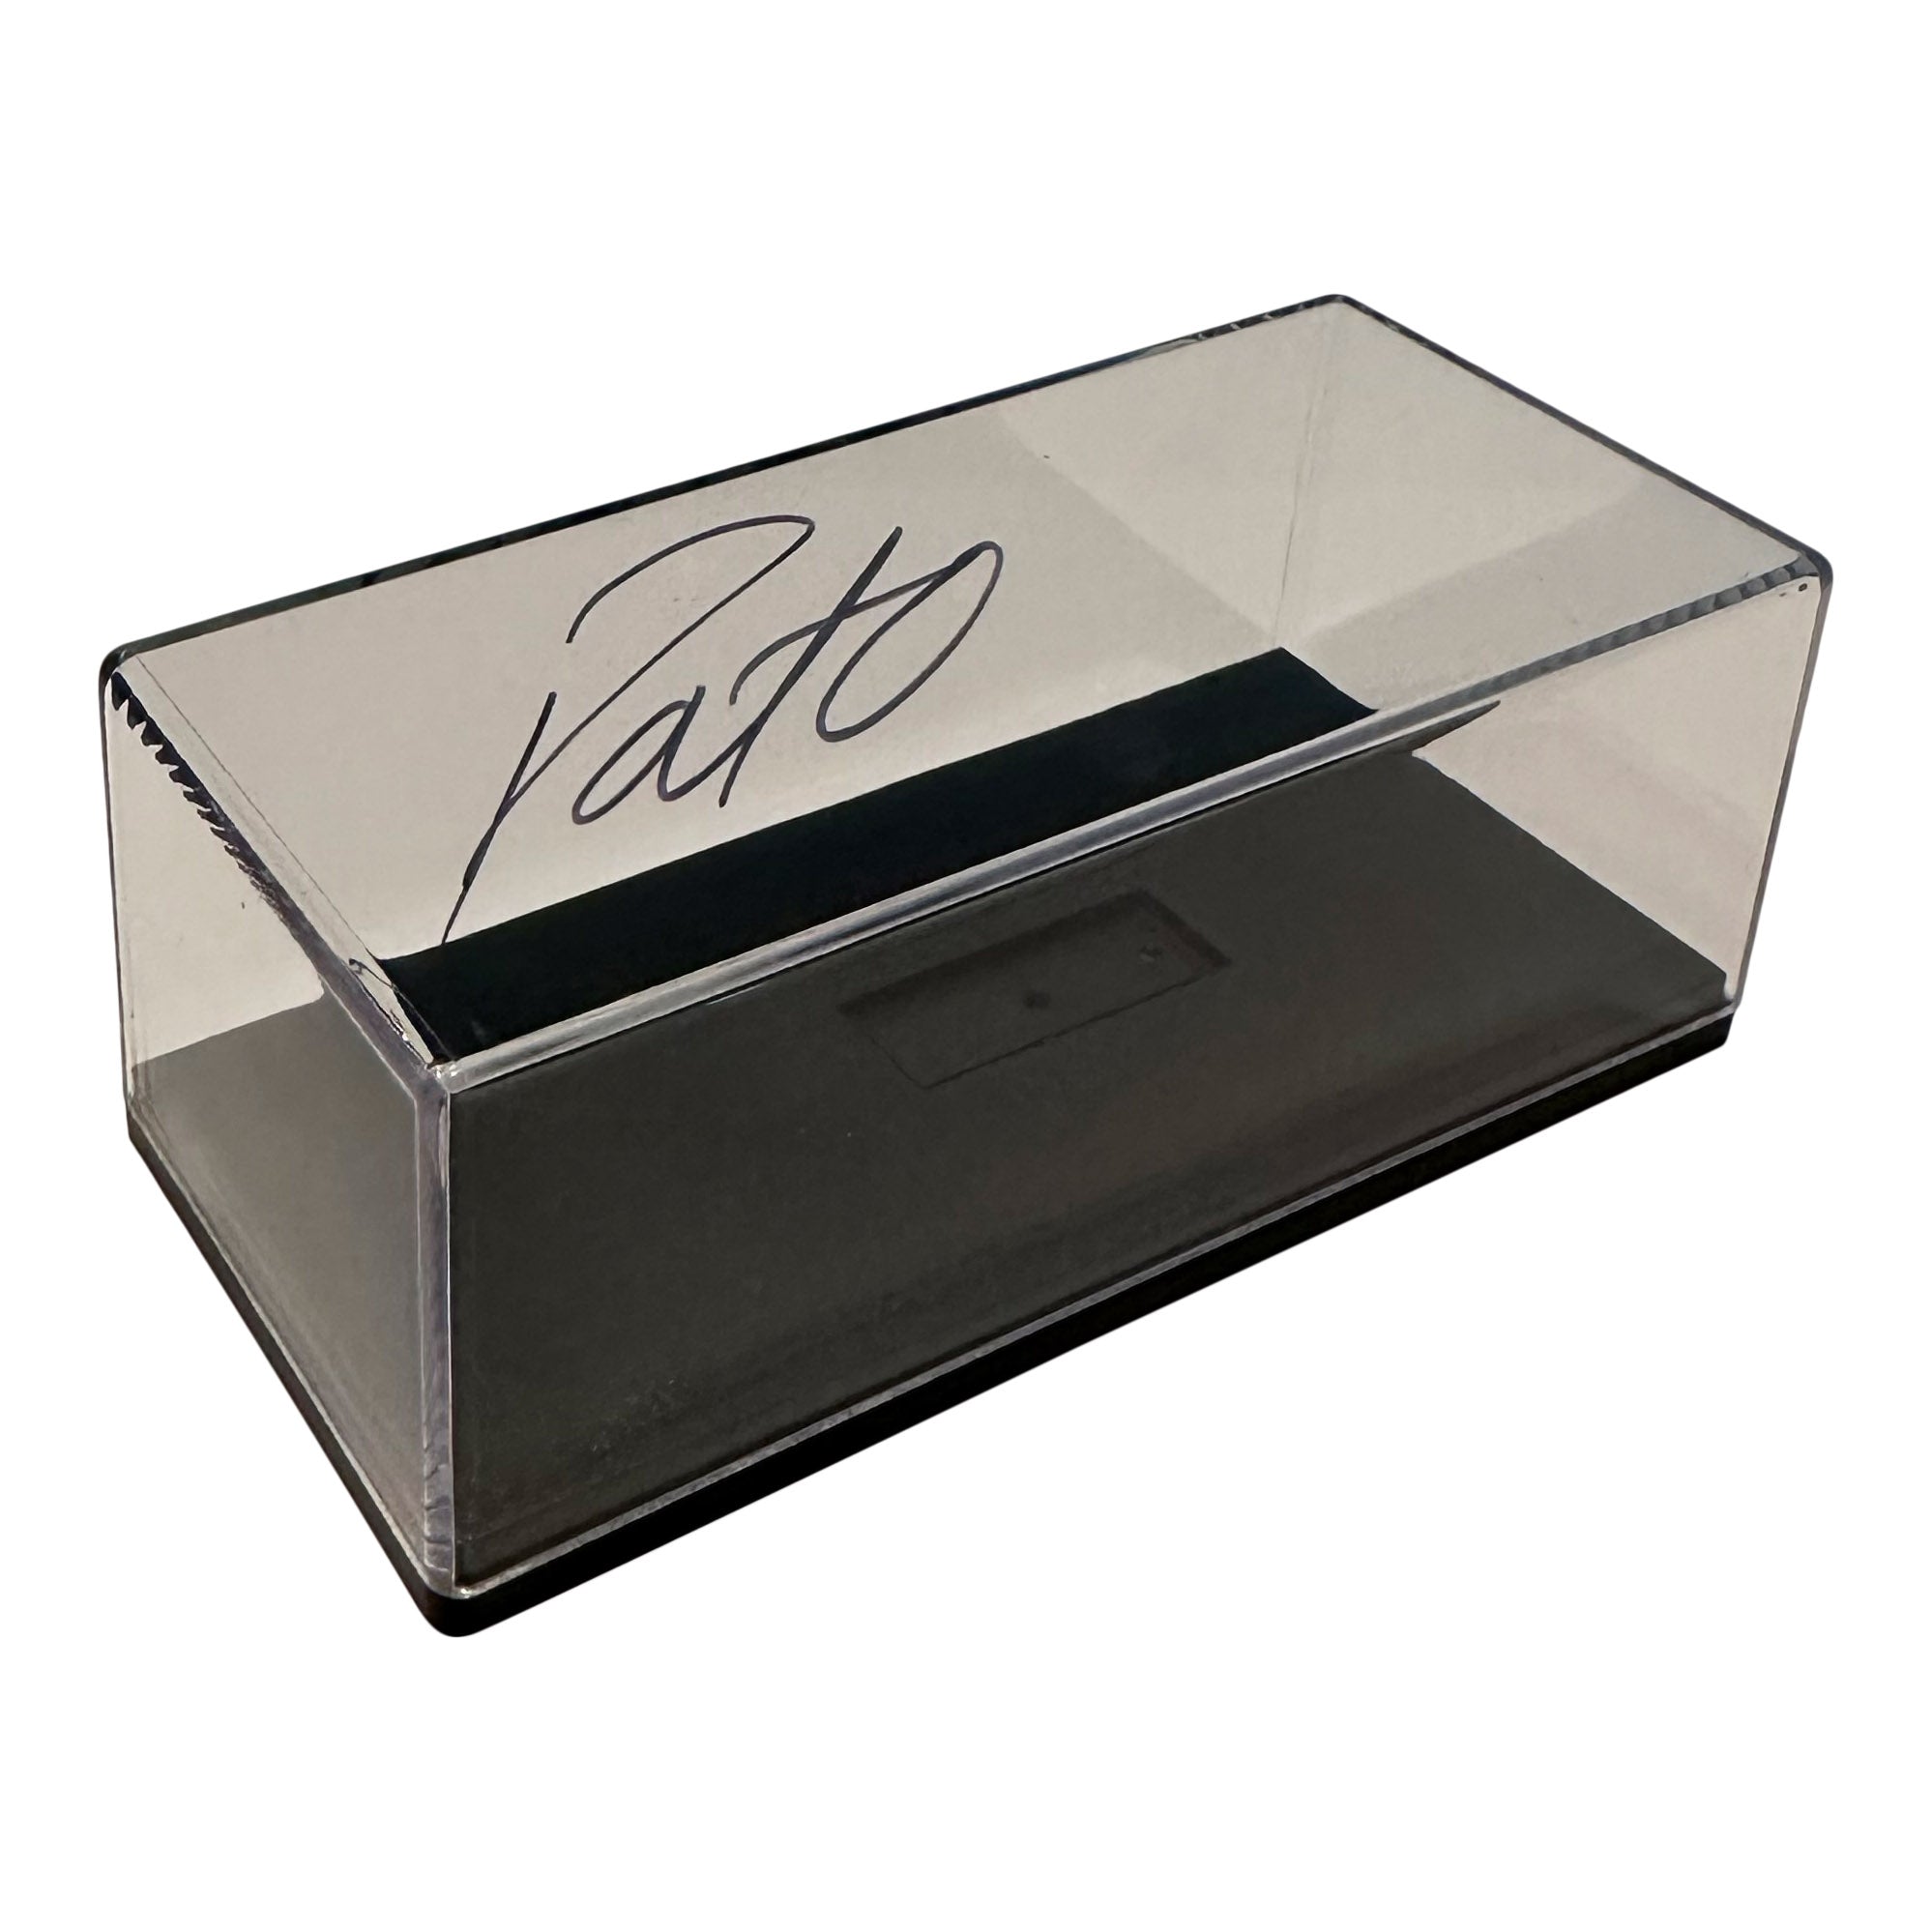 *Autographed* Clear Plastic Case for 1:64 sized Diecast Car